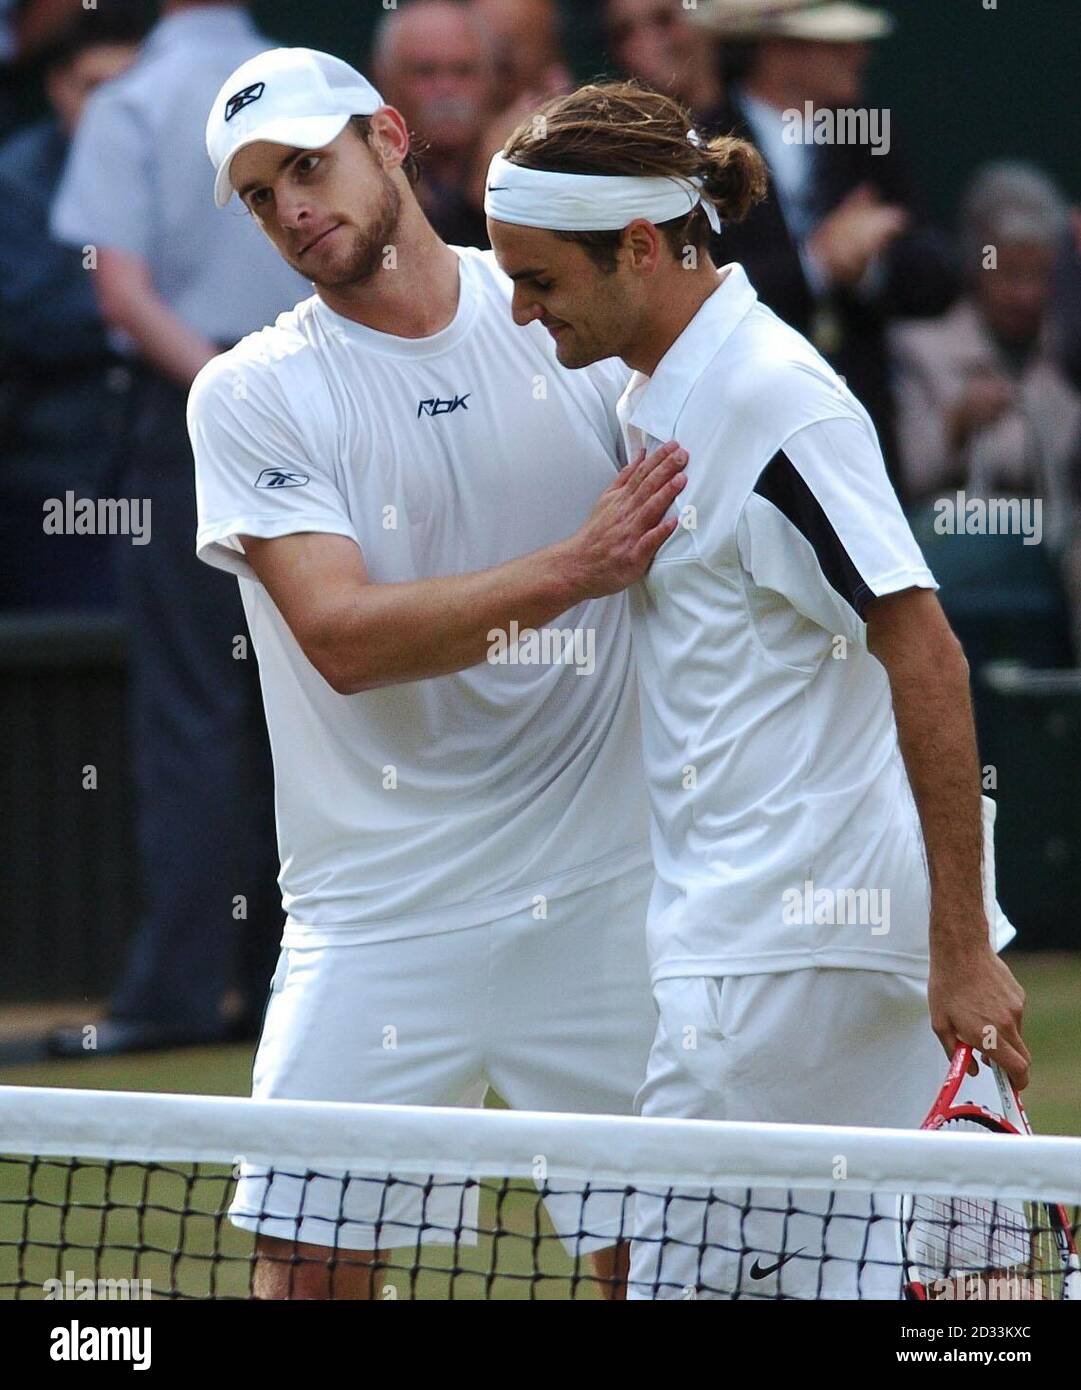 Roger Federer from Switzerland and Andy Roddick from the USA embrace after  the final of the Men's Singles tournament at The Lawn Tennis Championships  at Wimbledon, London. Final score 4:6/7:5/7:6/6:4 to Federer.